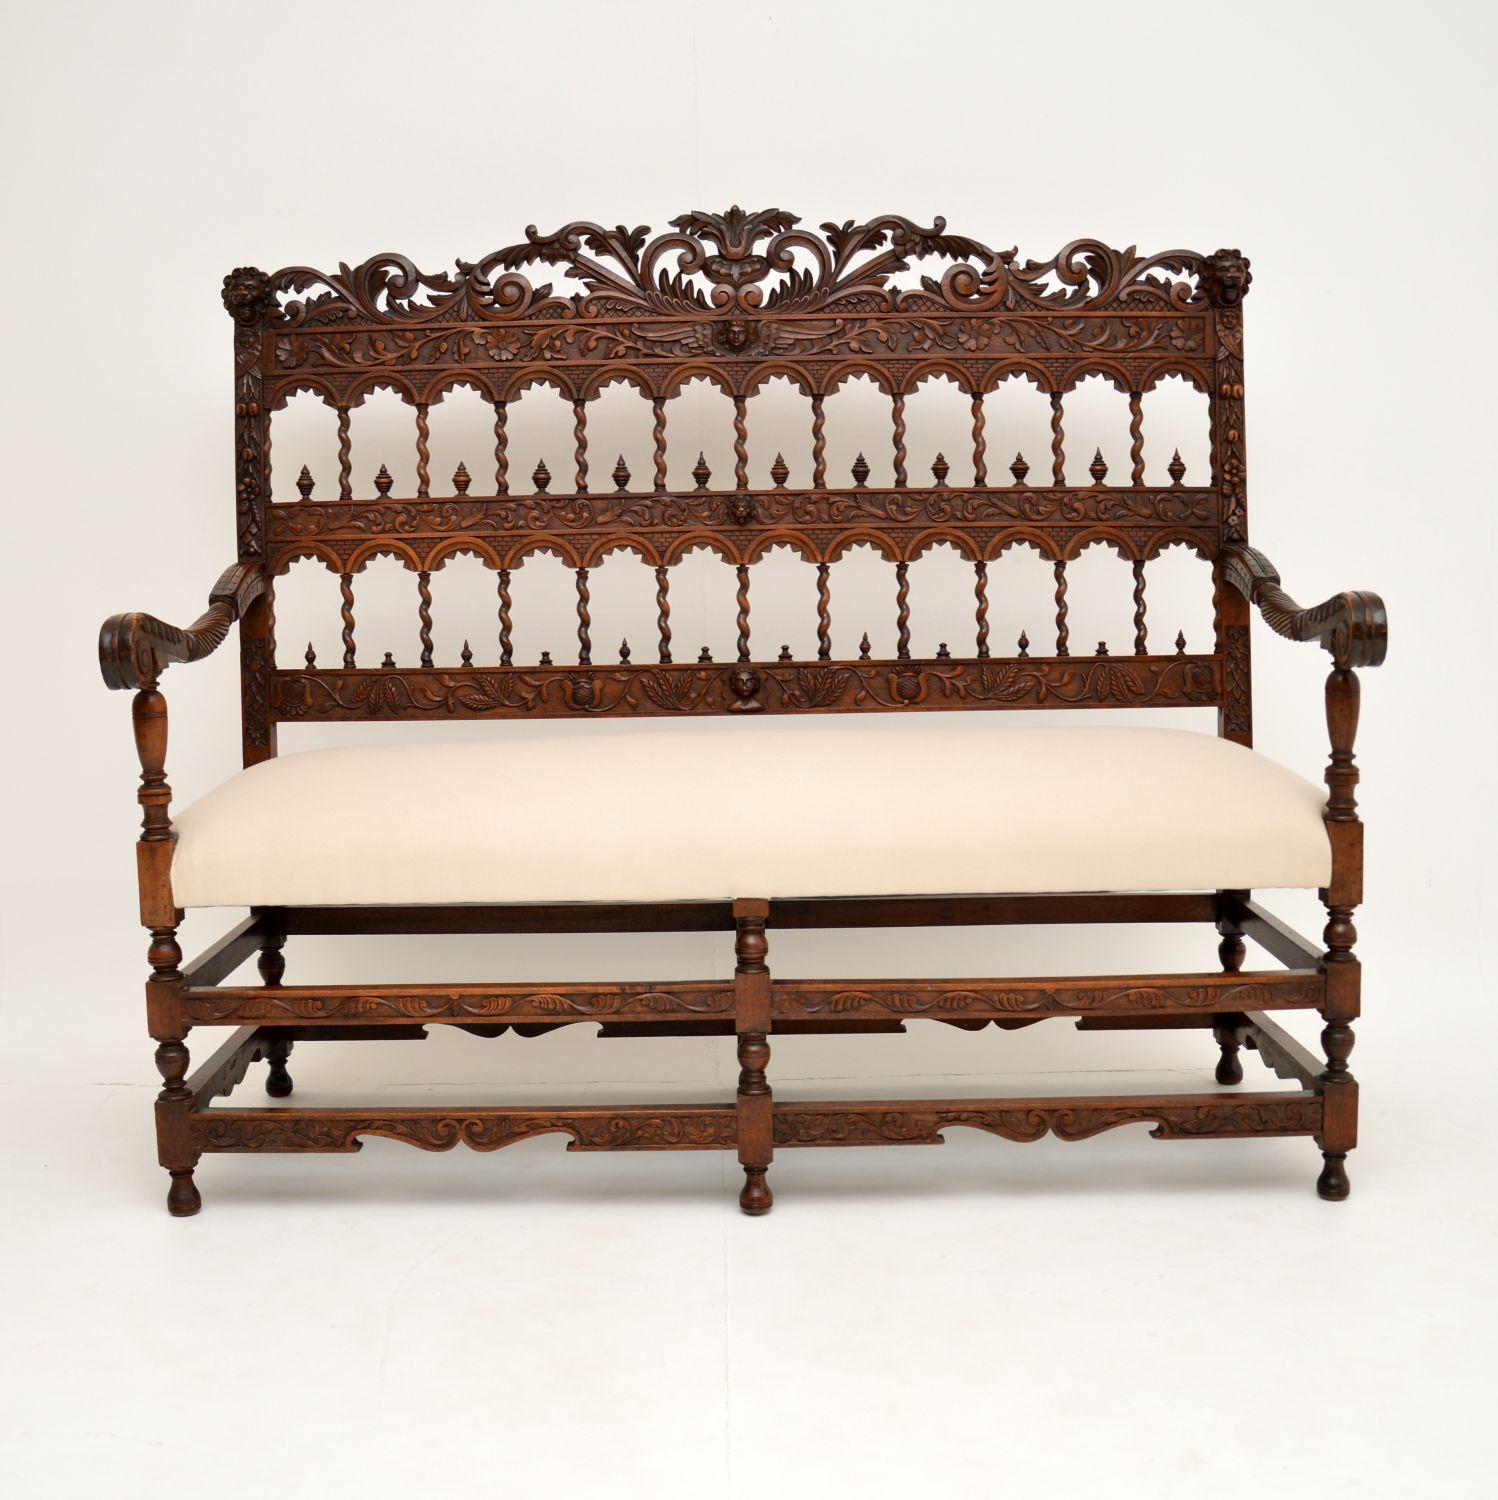 A stunning antique settee, finely carved from solid mahogany or possible walnut. This dates from around the 1840-60’s period, and is a most impressive work of art.

The profuse carvings depict floral motifs, lions heads, angels, pierced Moorish